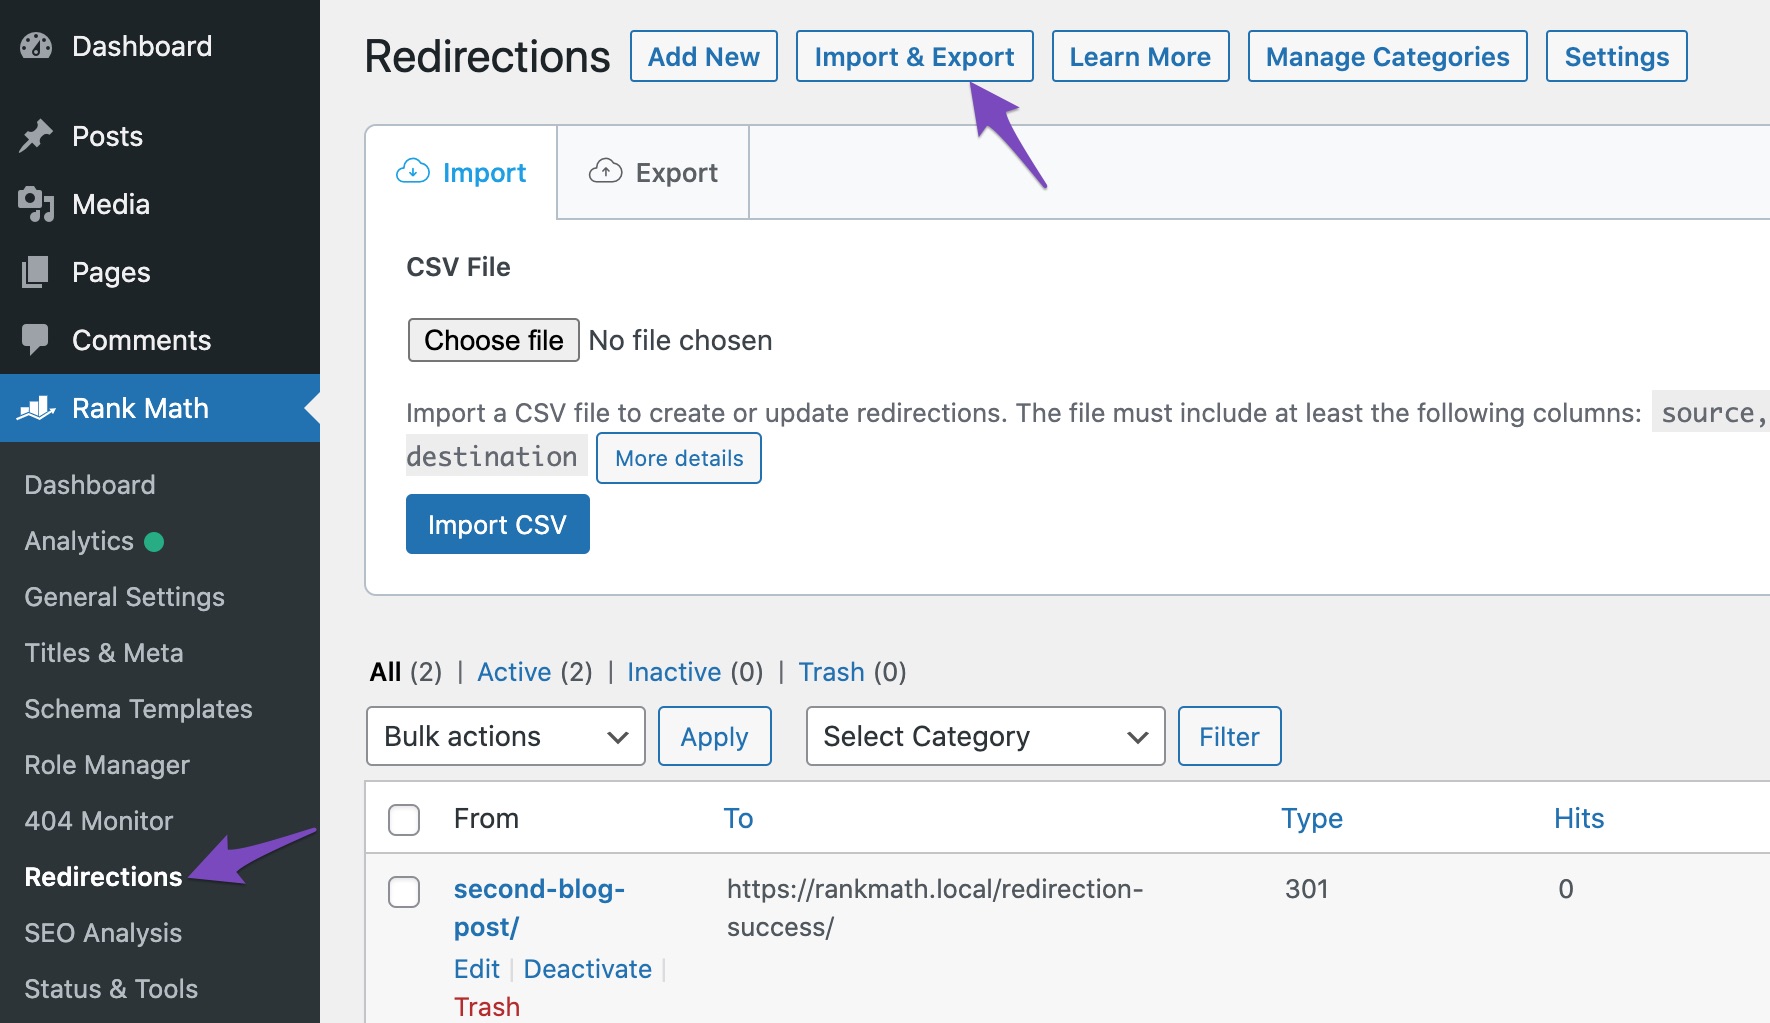 Navigate to Redirections Import & Export